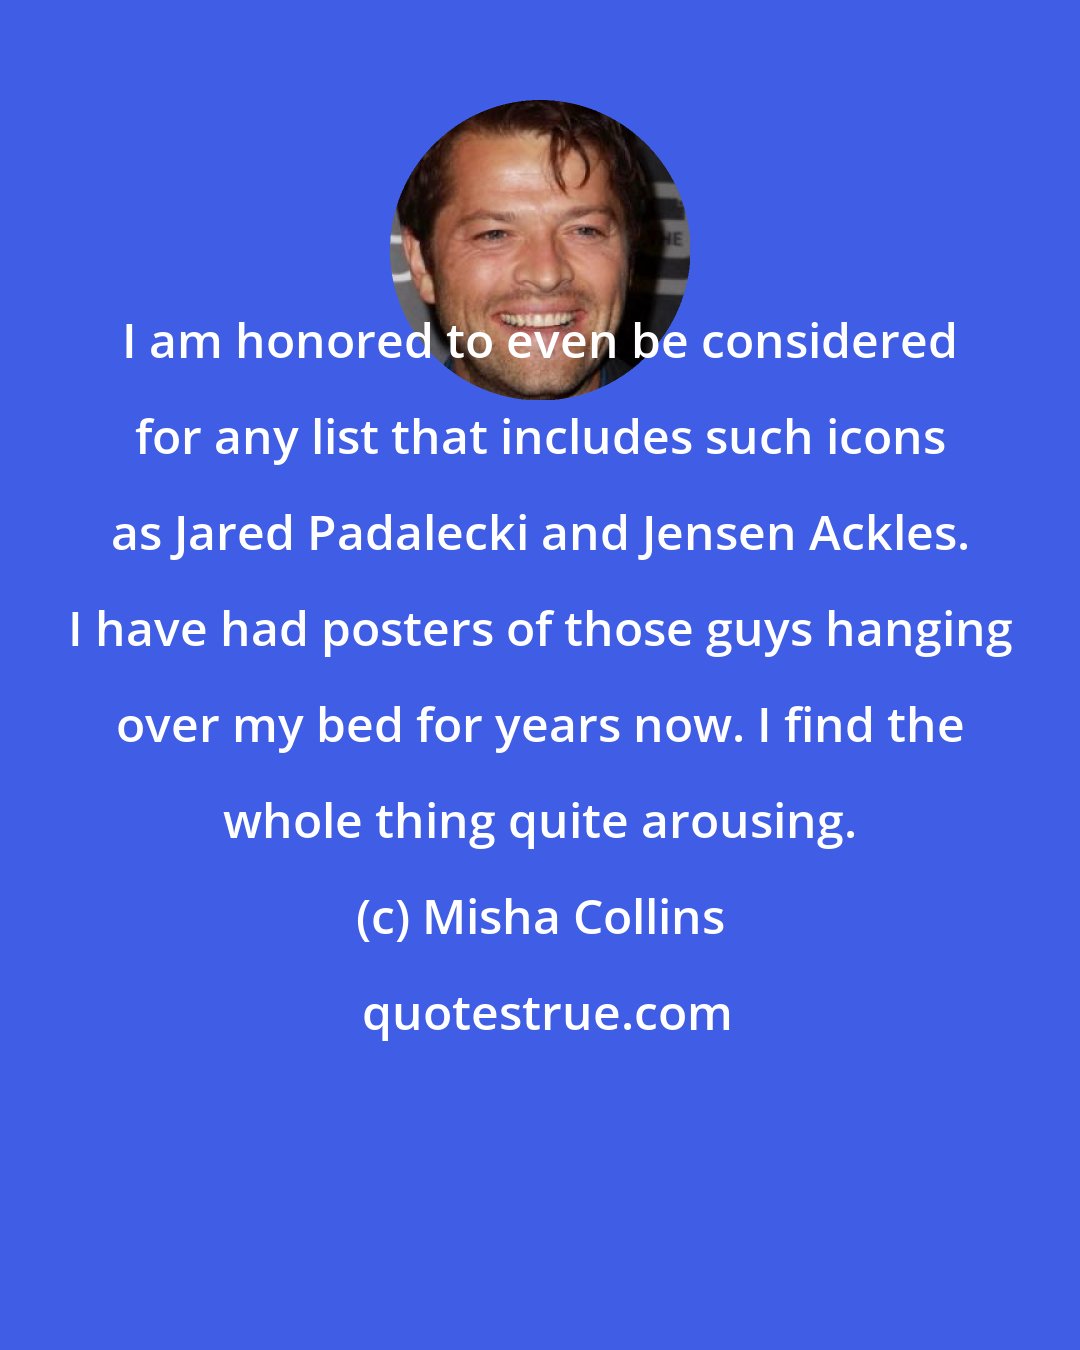 Misha Collins: I am honored to even be considered for any list that includes such icons as Jared Padalecki and Jensen Ackles. I have had posters of those guys hanging over my bed for years now. I find the whole thing quite arousing.